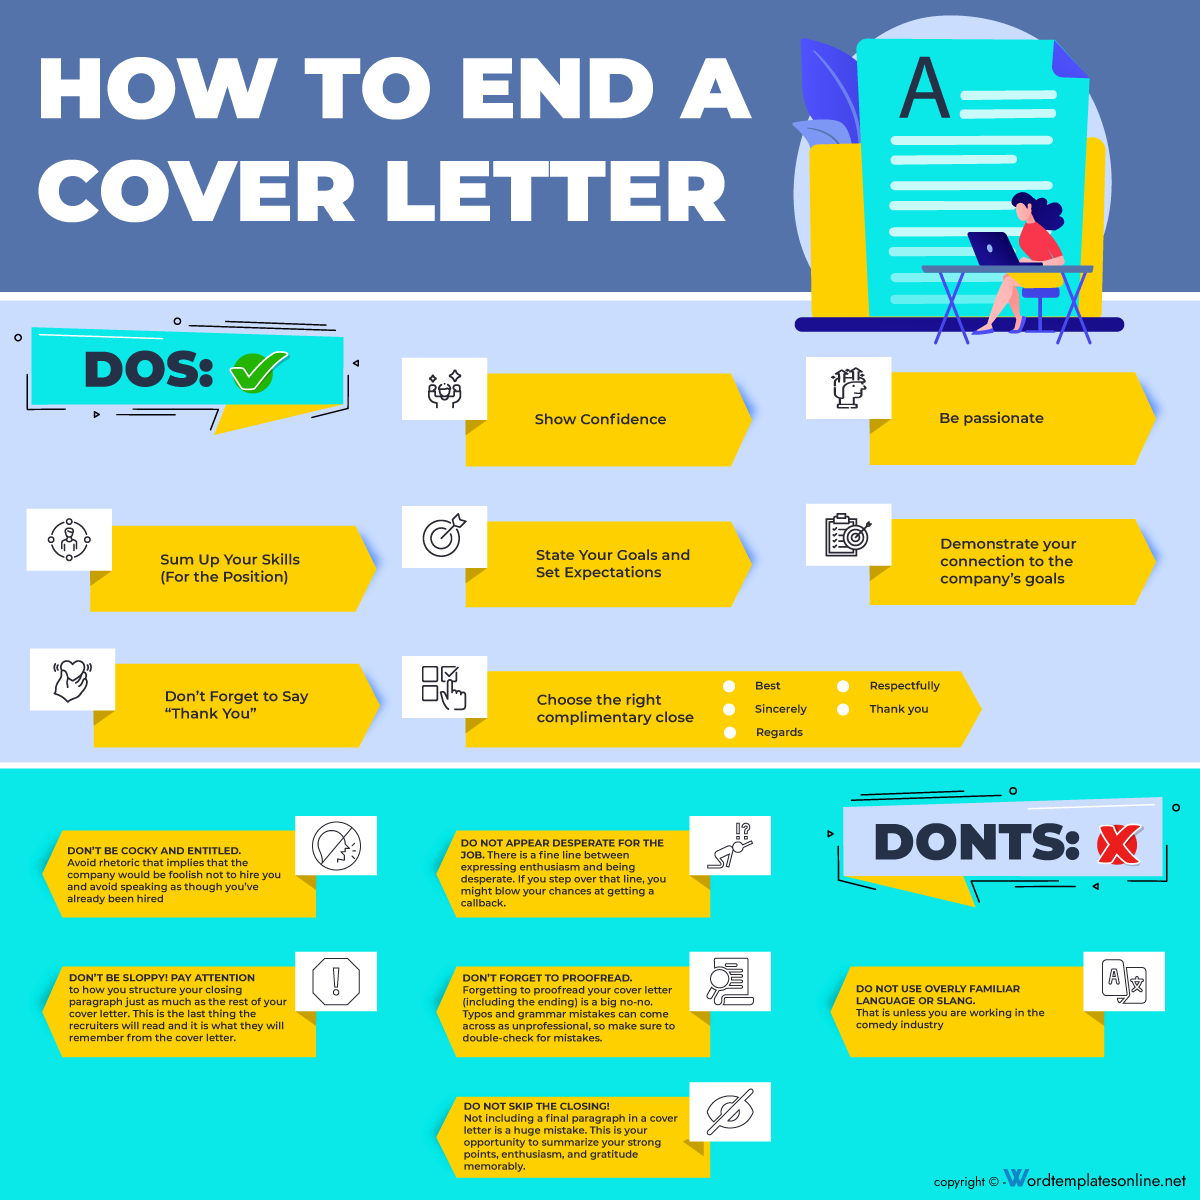 How to End a cover letter